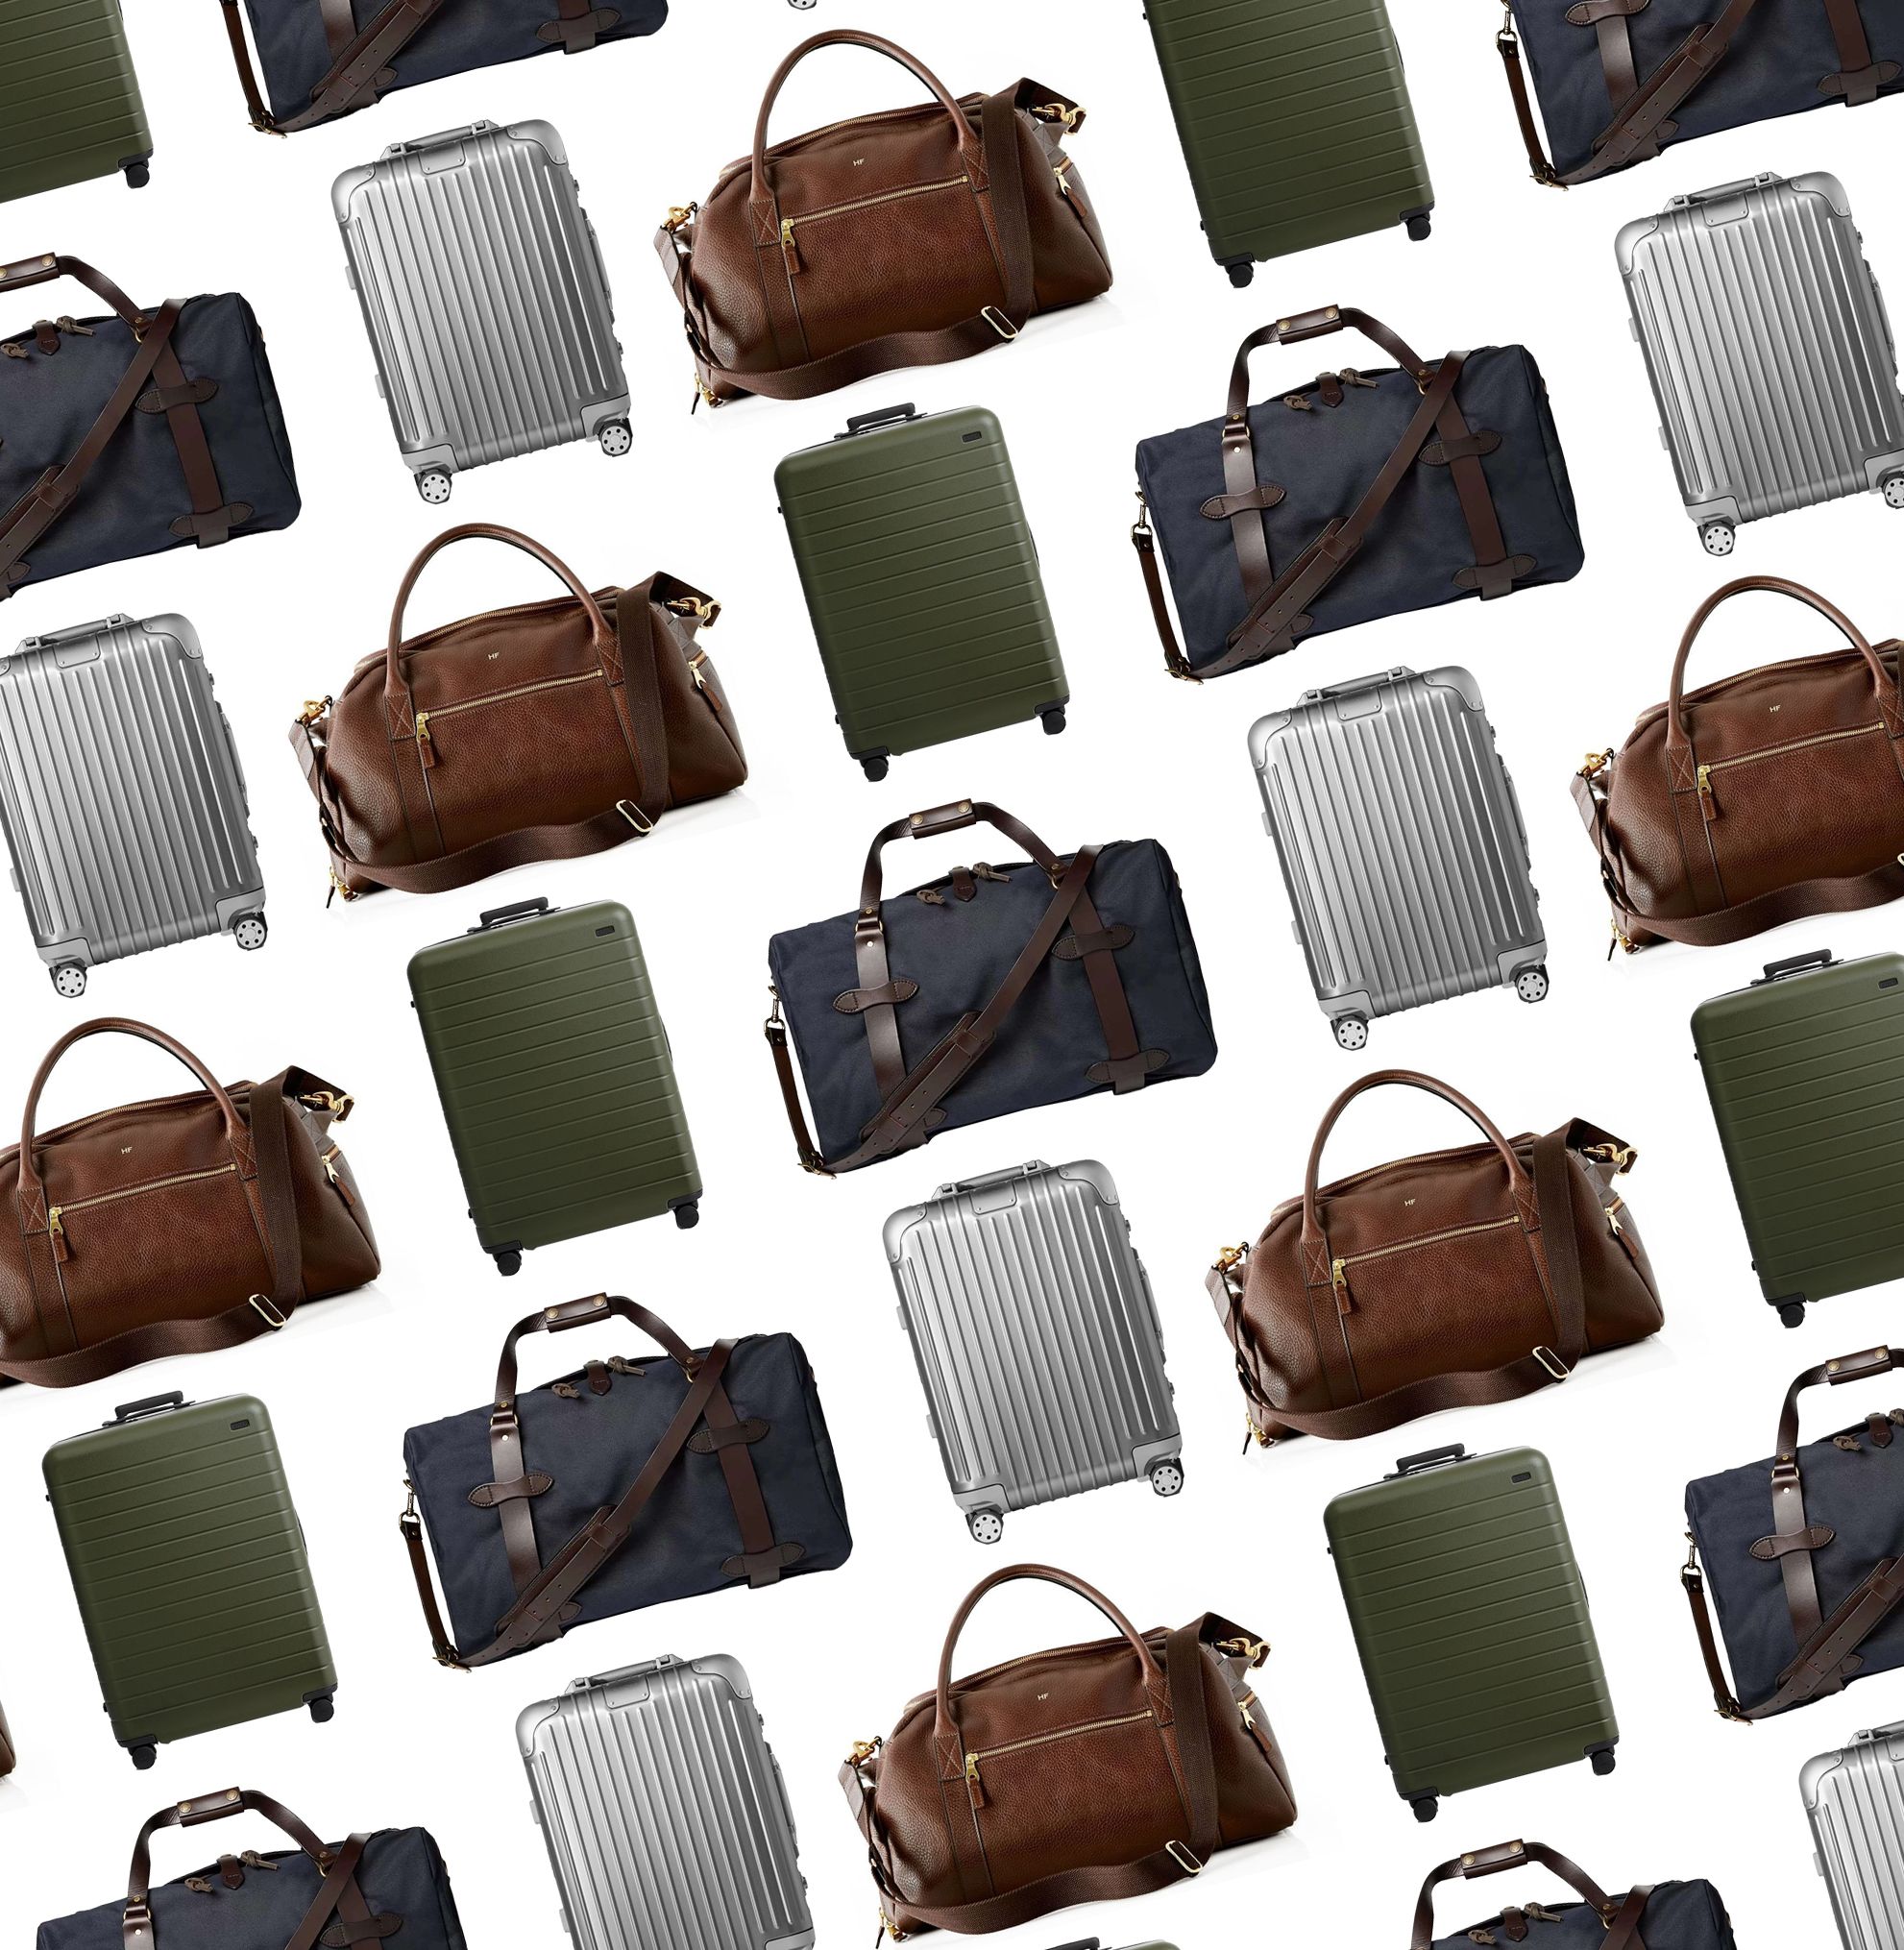 <p>We're not going to beat around the bush: A <a href="https://www.townandcountrymag.com/leisure/travel-guide/g37886837/best-designer-luxury-luggage-brands/">good travel bag</a> is an absolute non-negotiable no matter the length of your trip. There are few factors to keep in mind when investing in a proper piece of luggage, first and foremost being the construction. You want a bag that's crafted from durable materials but is still lightweight and won't dig into your shoulders. You also should look for a style that's functional. A bigger main compartment can be helpful for fitting your essentials, as are pockets for keeping your smaller belongings organized. </p><p>From there, it's up to you decide the kind you might make the most use of. From leather weekenders for short getaways with the guys, to <a href="https://www.townandcountrymag.com/leisure/travel-guide/g28540860/best-garment-bags/">garment bags</a> that keeps your business suits wrinkle-free for work trips, to <a href="https://www.townandcountrymag.com/leisure/travel-guide/g44630189/best-hard-shell-luggage/">hard-shell suitcases</a> for 2-week voyages abroad, here are some of the best travel bags every man should add to his travel rotation. </p>